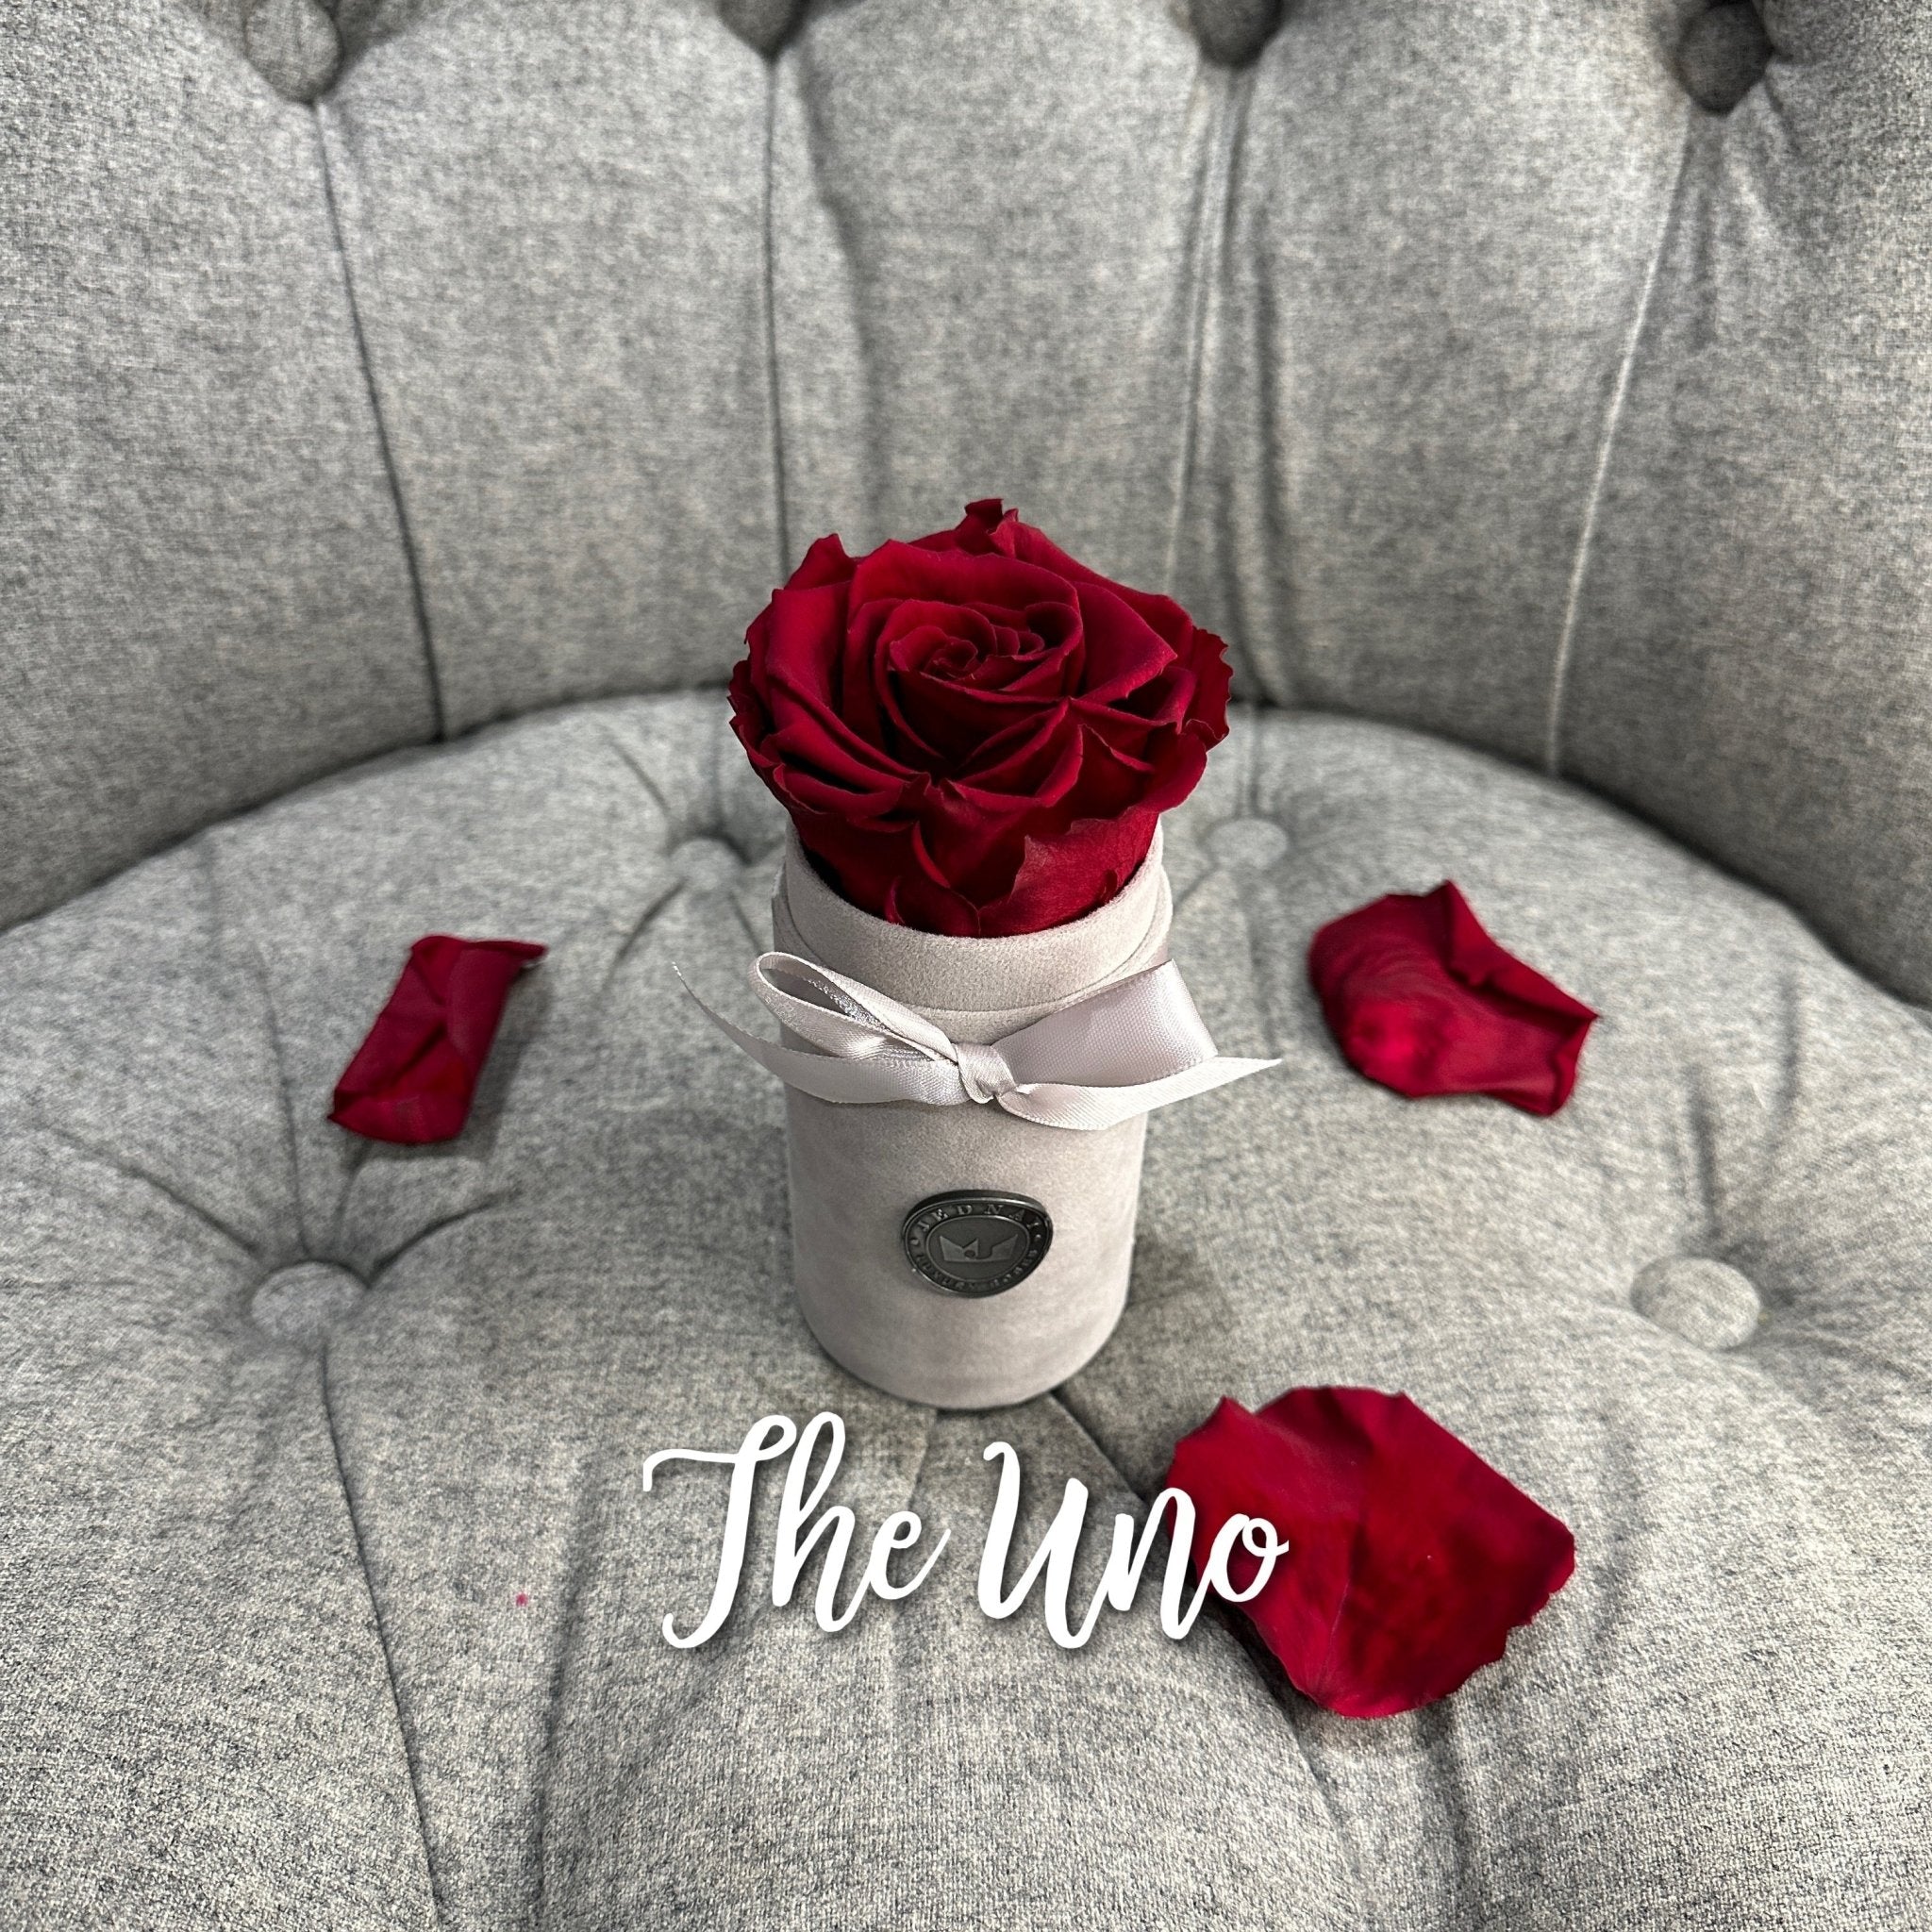 THE UNO BY JEDNAY - Jednay Roses